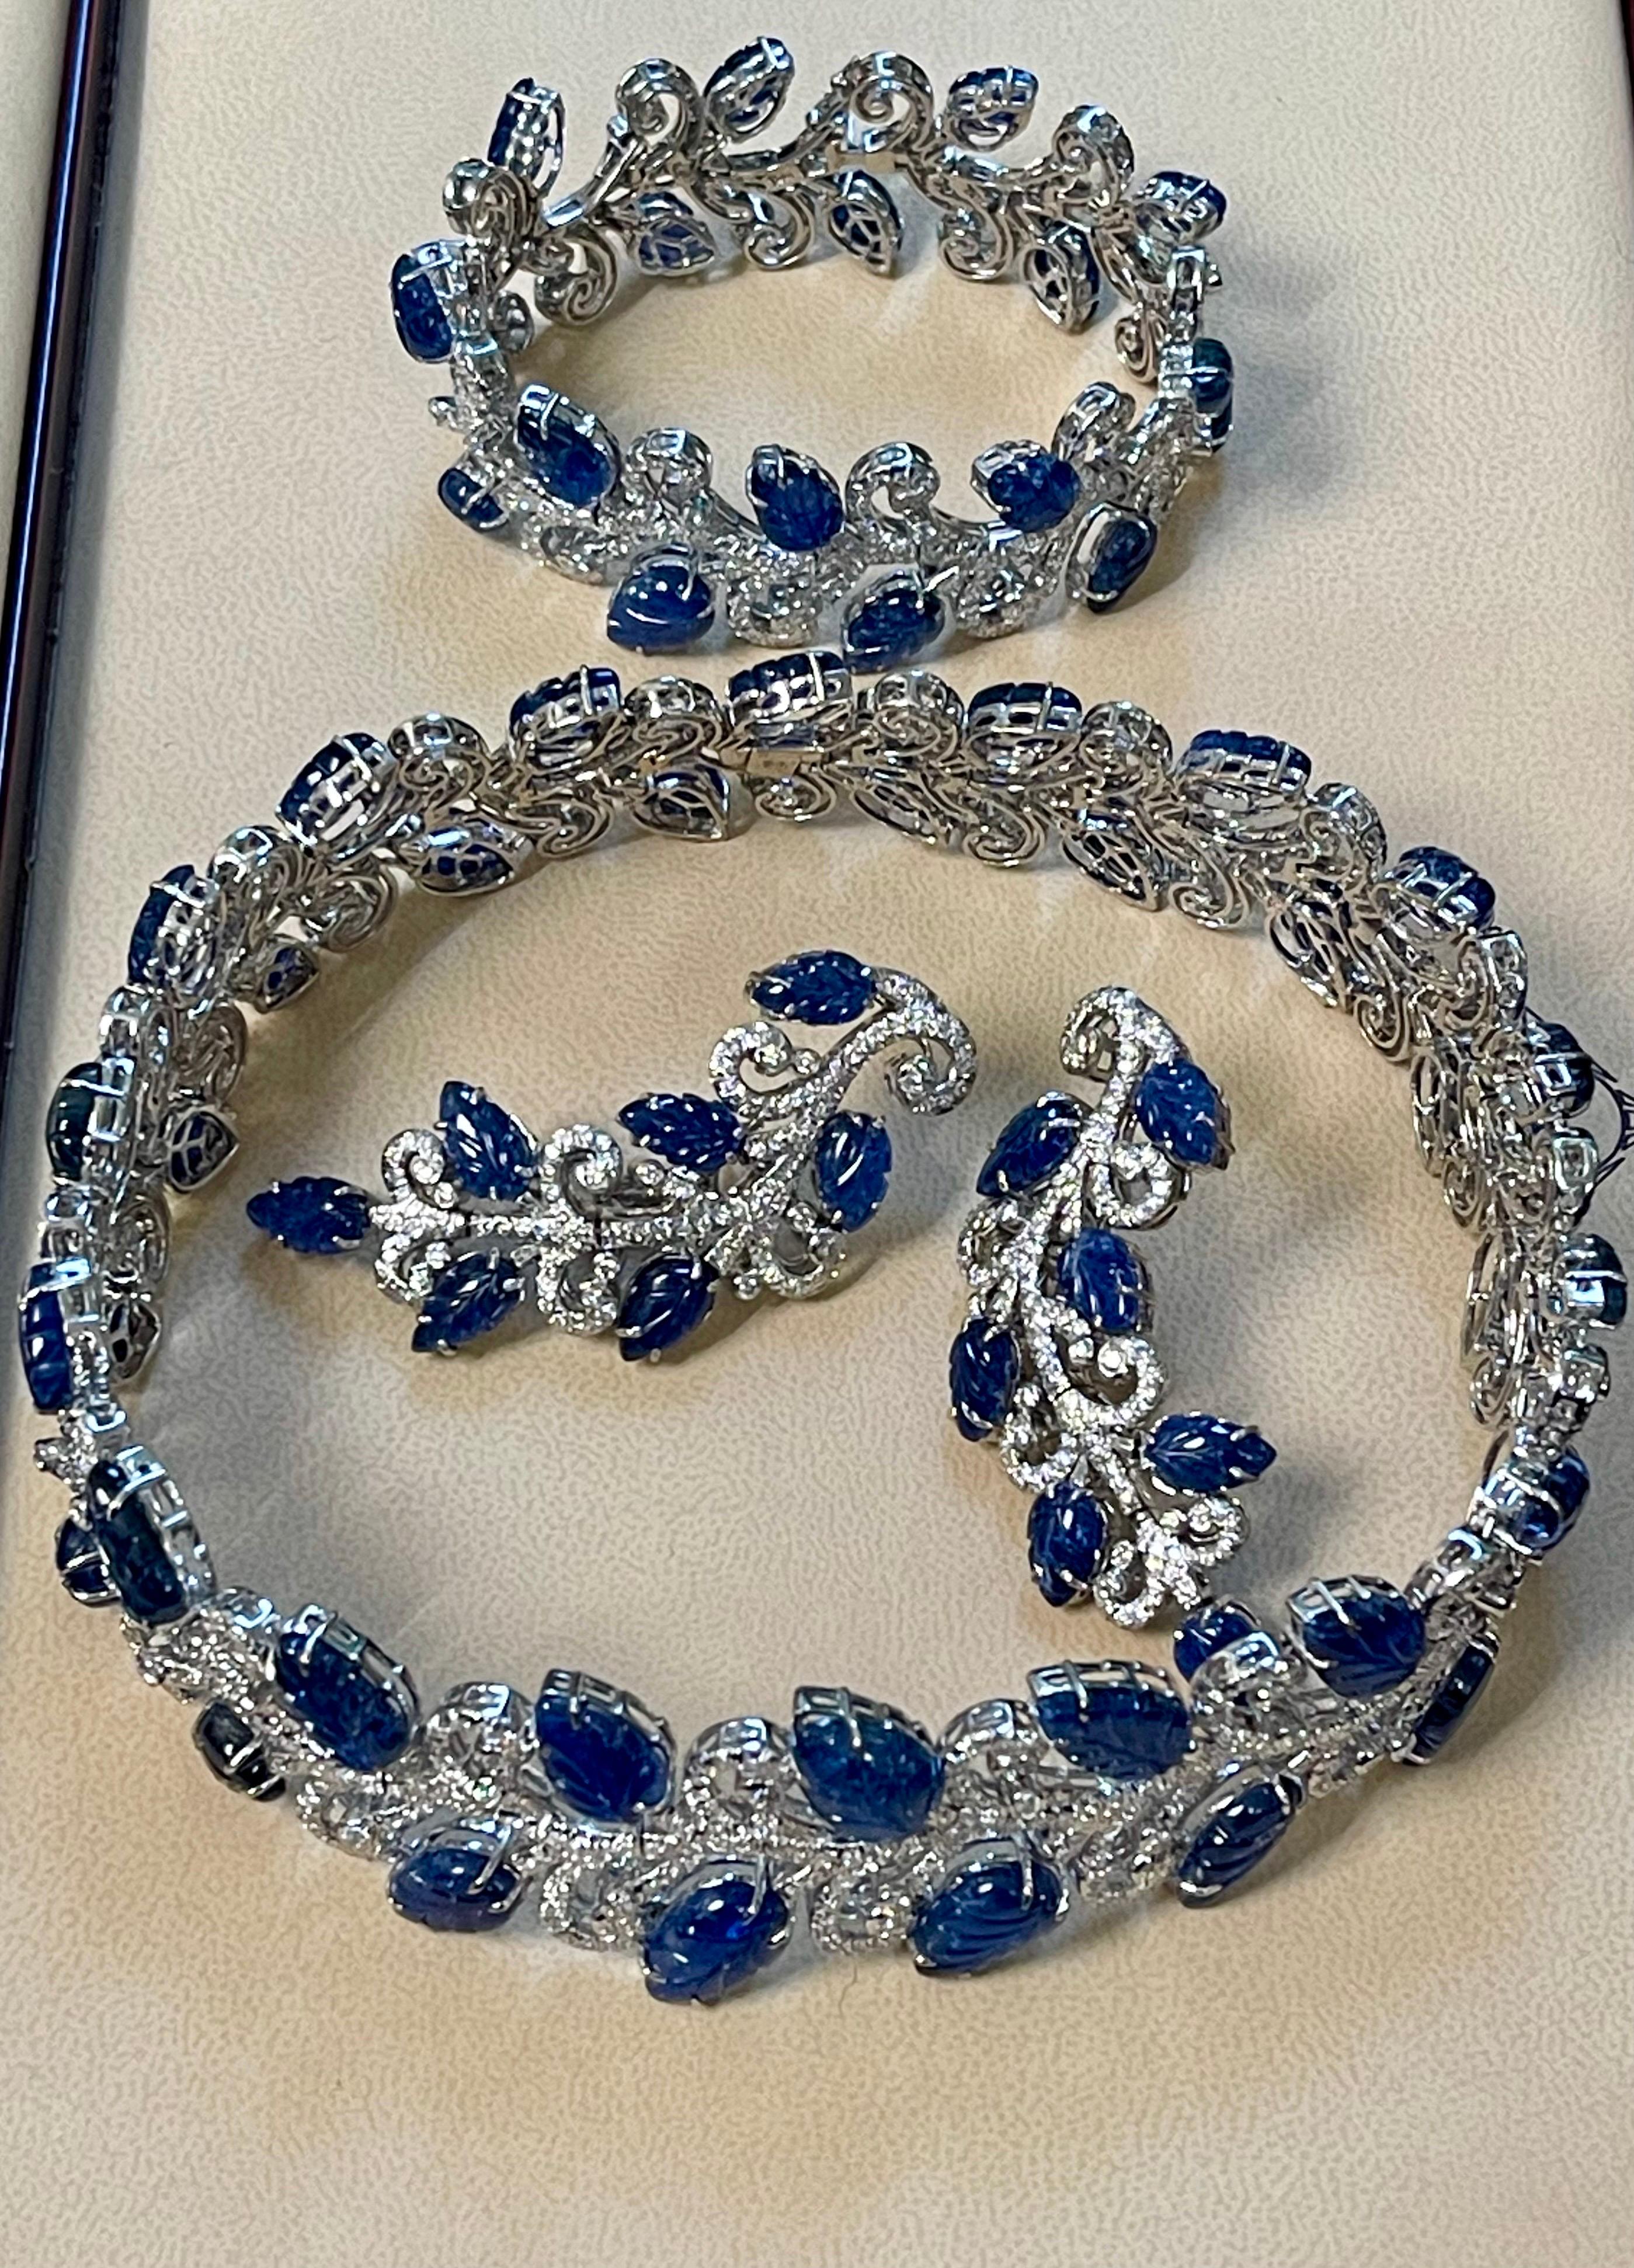 330 Ct Natural Carved Blue Sapphire & 65 Ct Diamond Necklace Bracelet & Earring For Sale 9